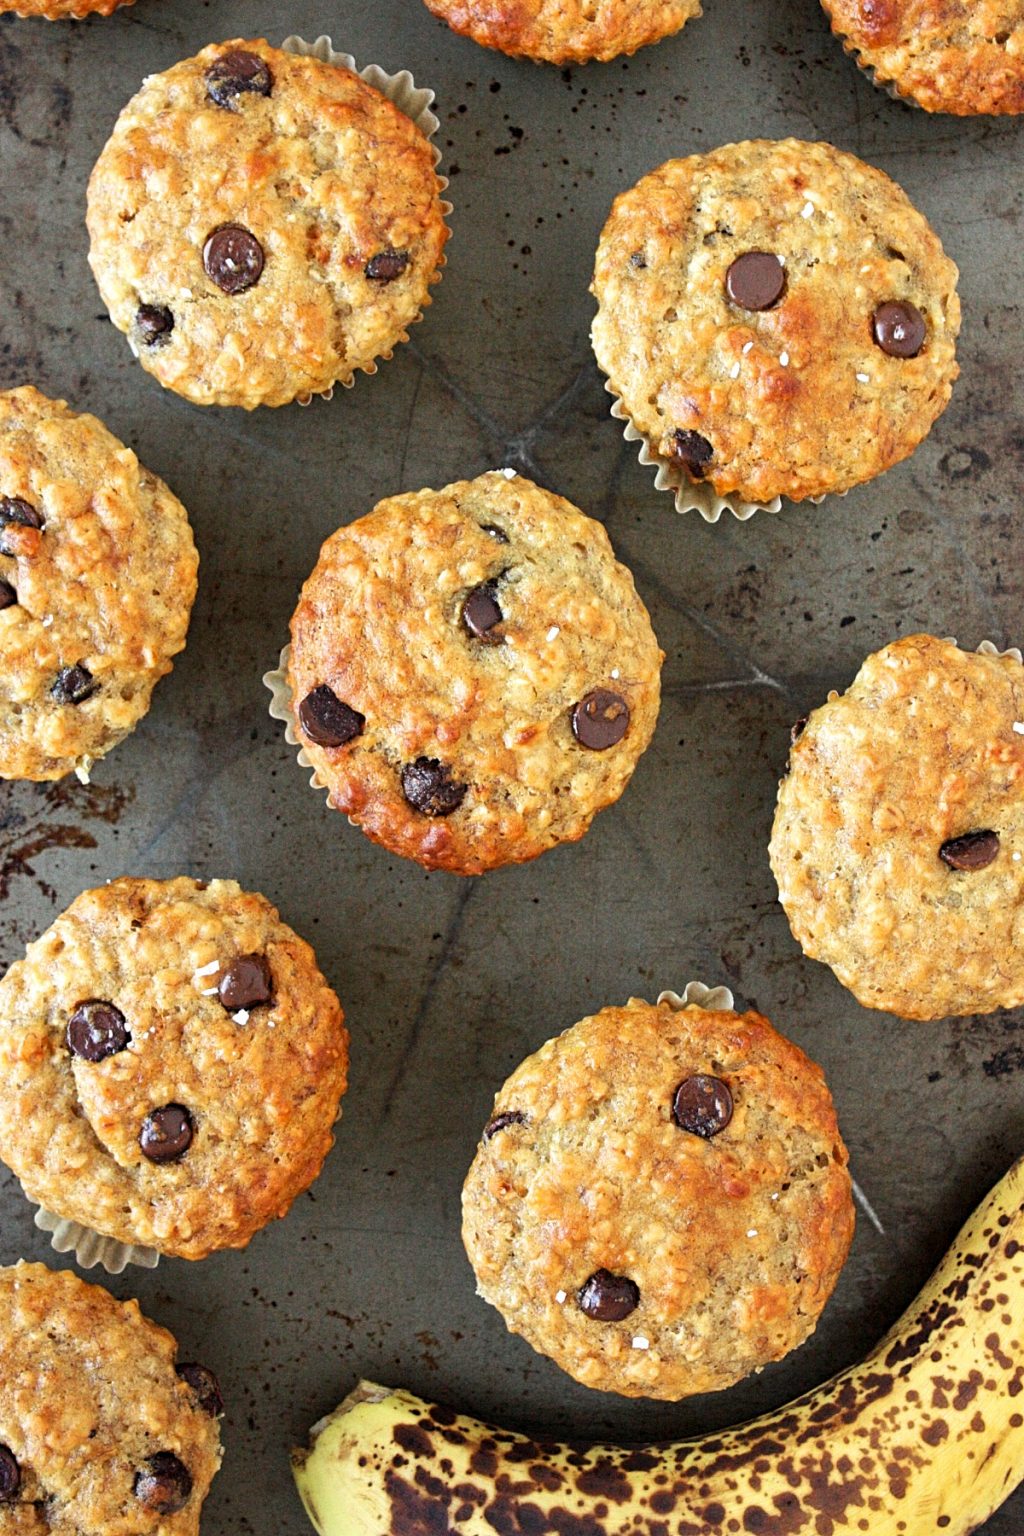 Oatmeal Banana Muffins with Chocolate Chips